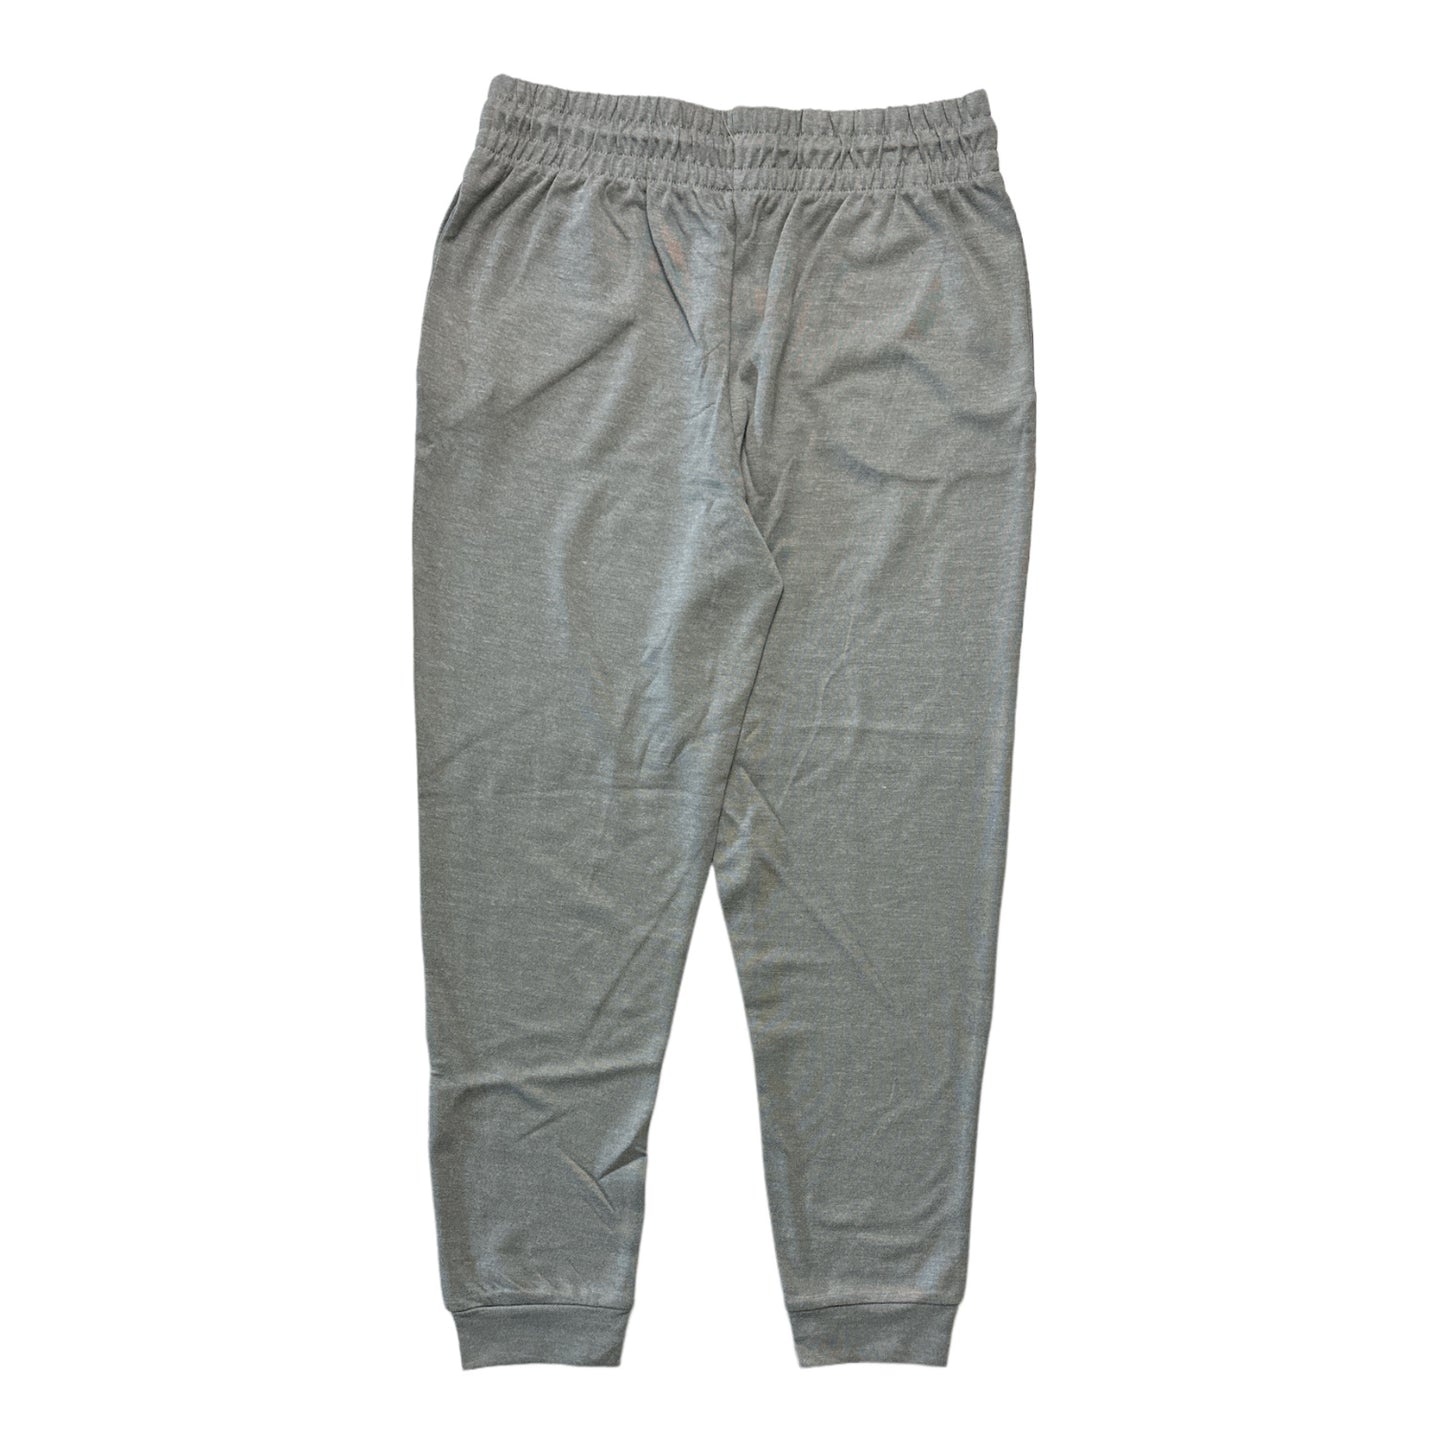 Liv Casual Men's NCAA Tapered Leg With Drawstring Lounge Pant